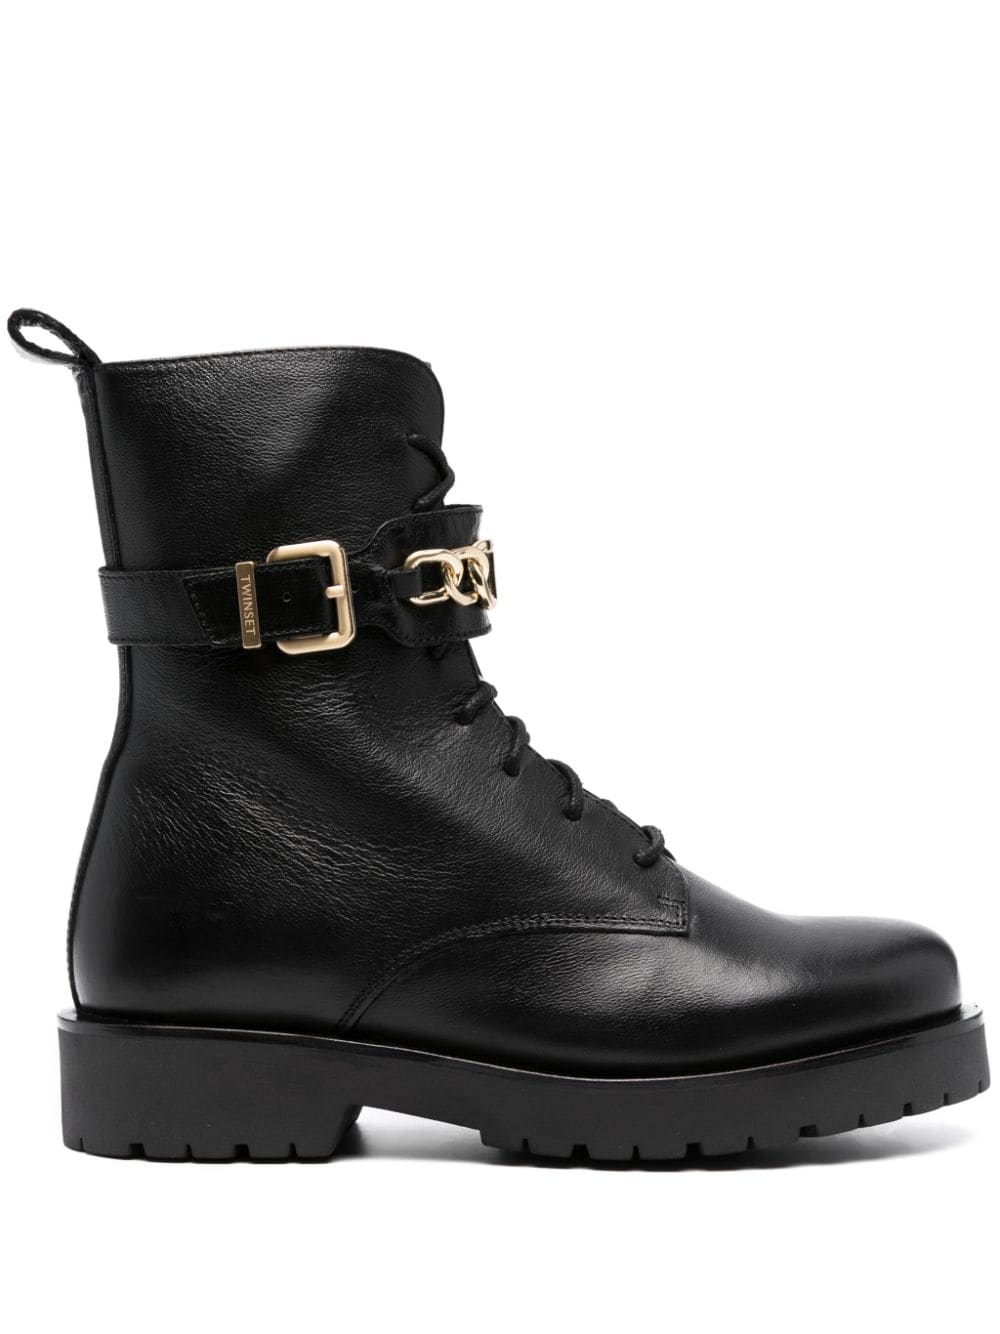 TWINSET chain-link leather ankle boots - Black von TWINSET